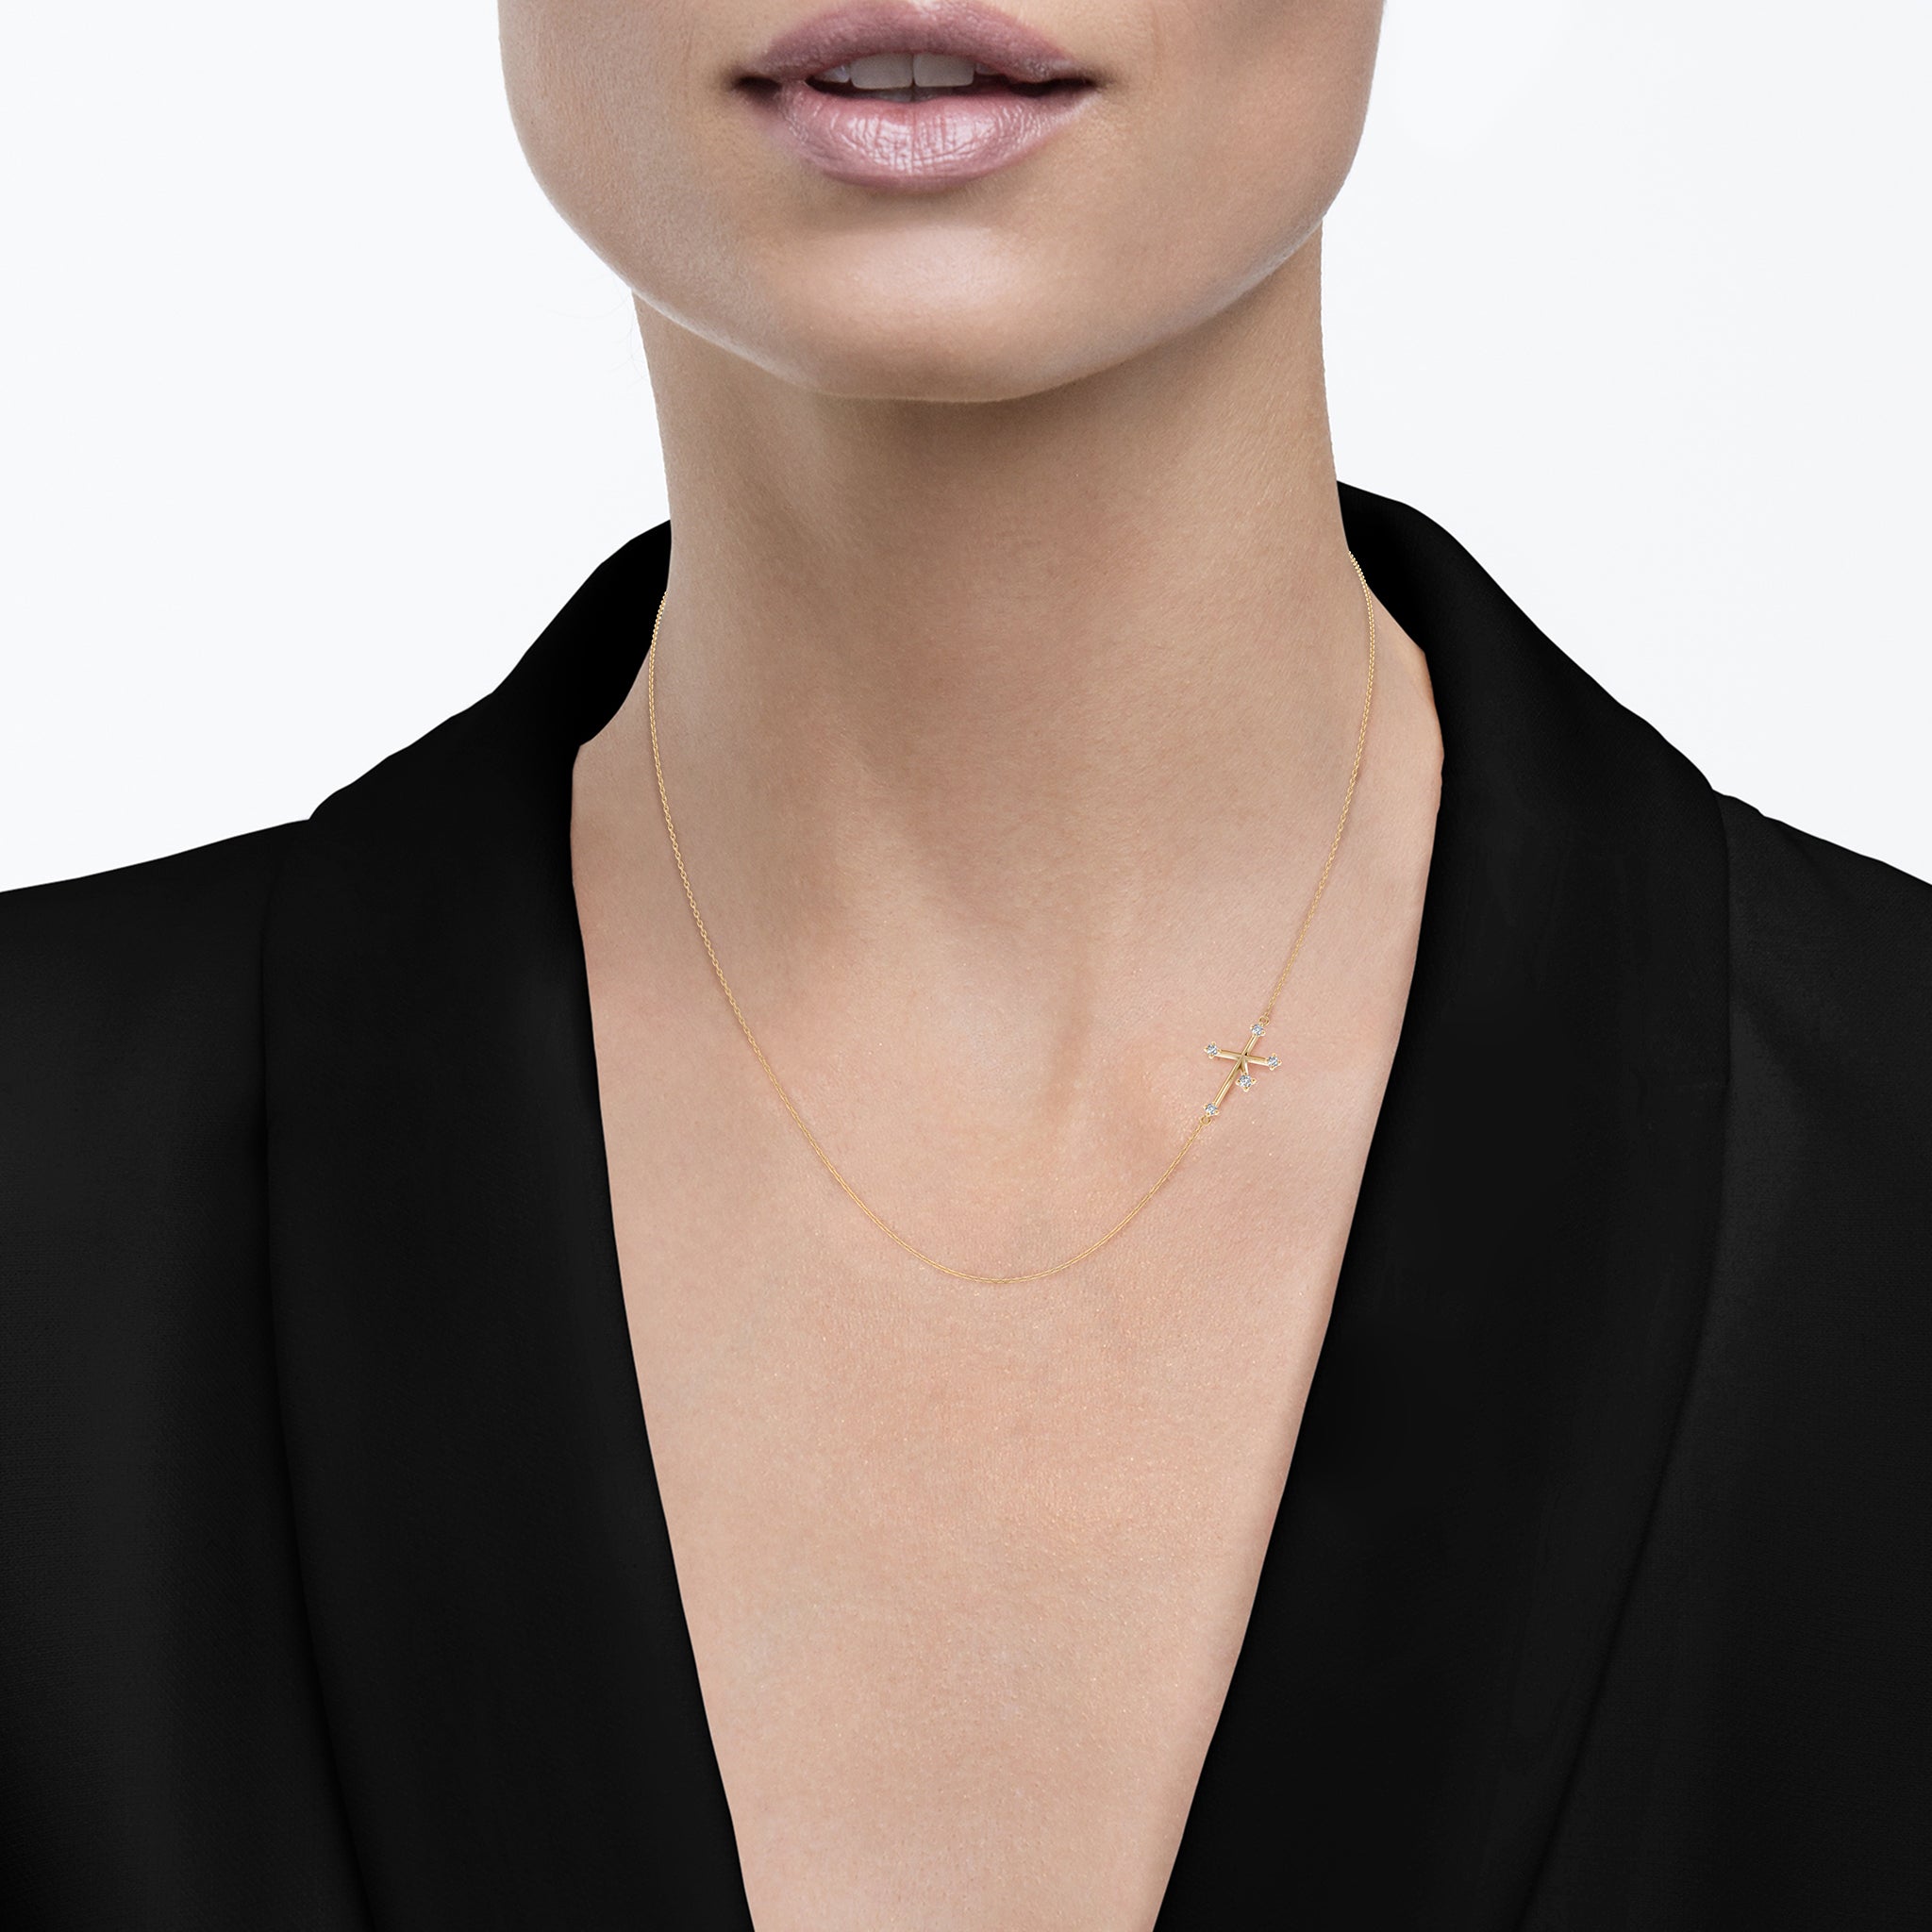 Shimansky - Women Wearing the Southern Cross Diamond Necklace Crafted in 14K Yellow Gold